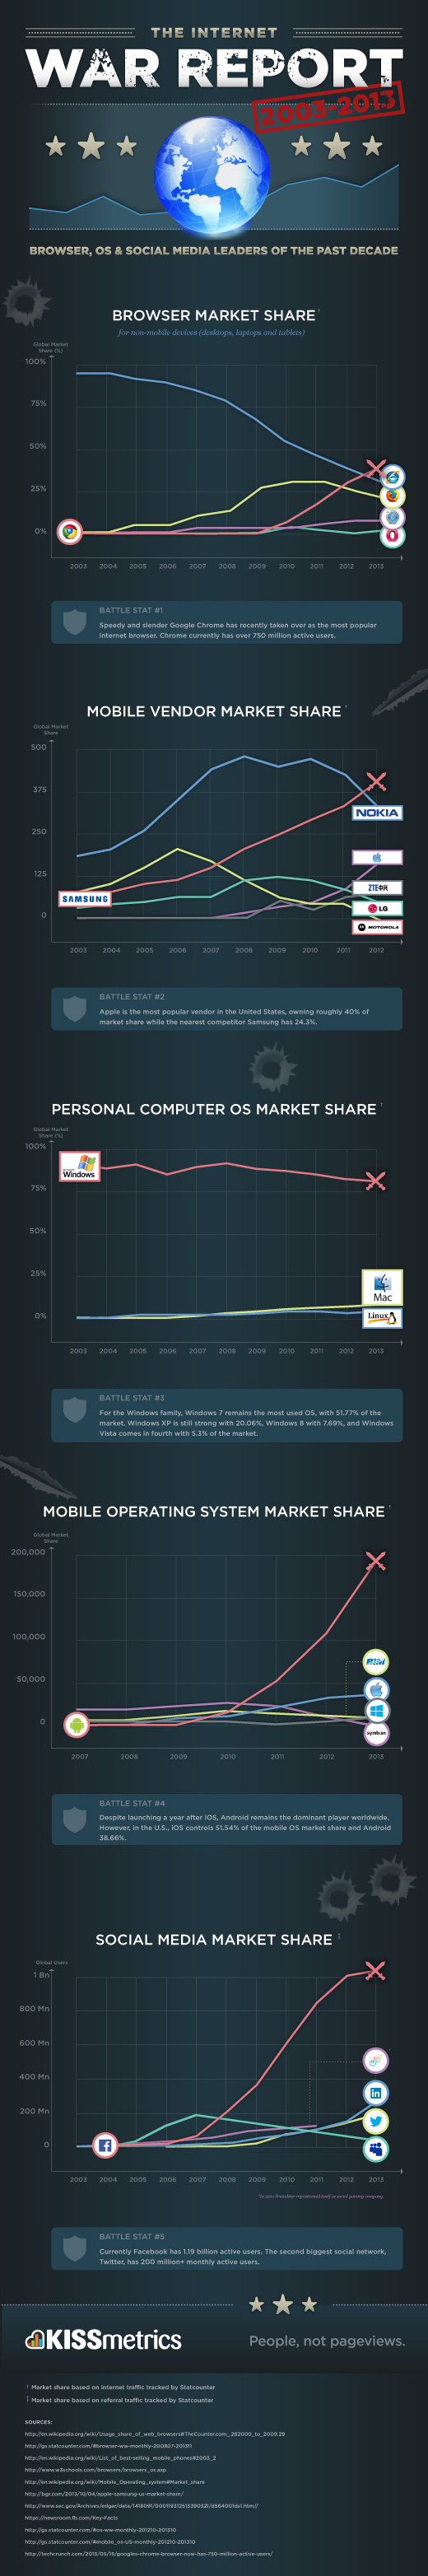 Internet War Report 2003 to 2013 - Infographic